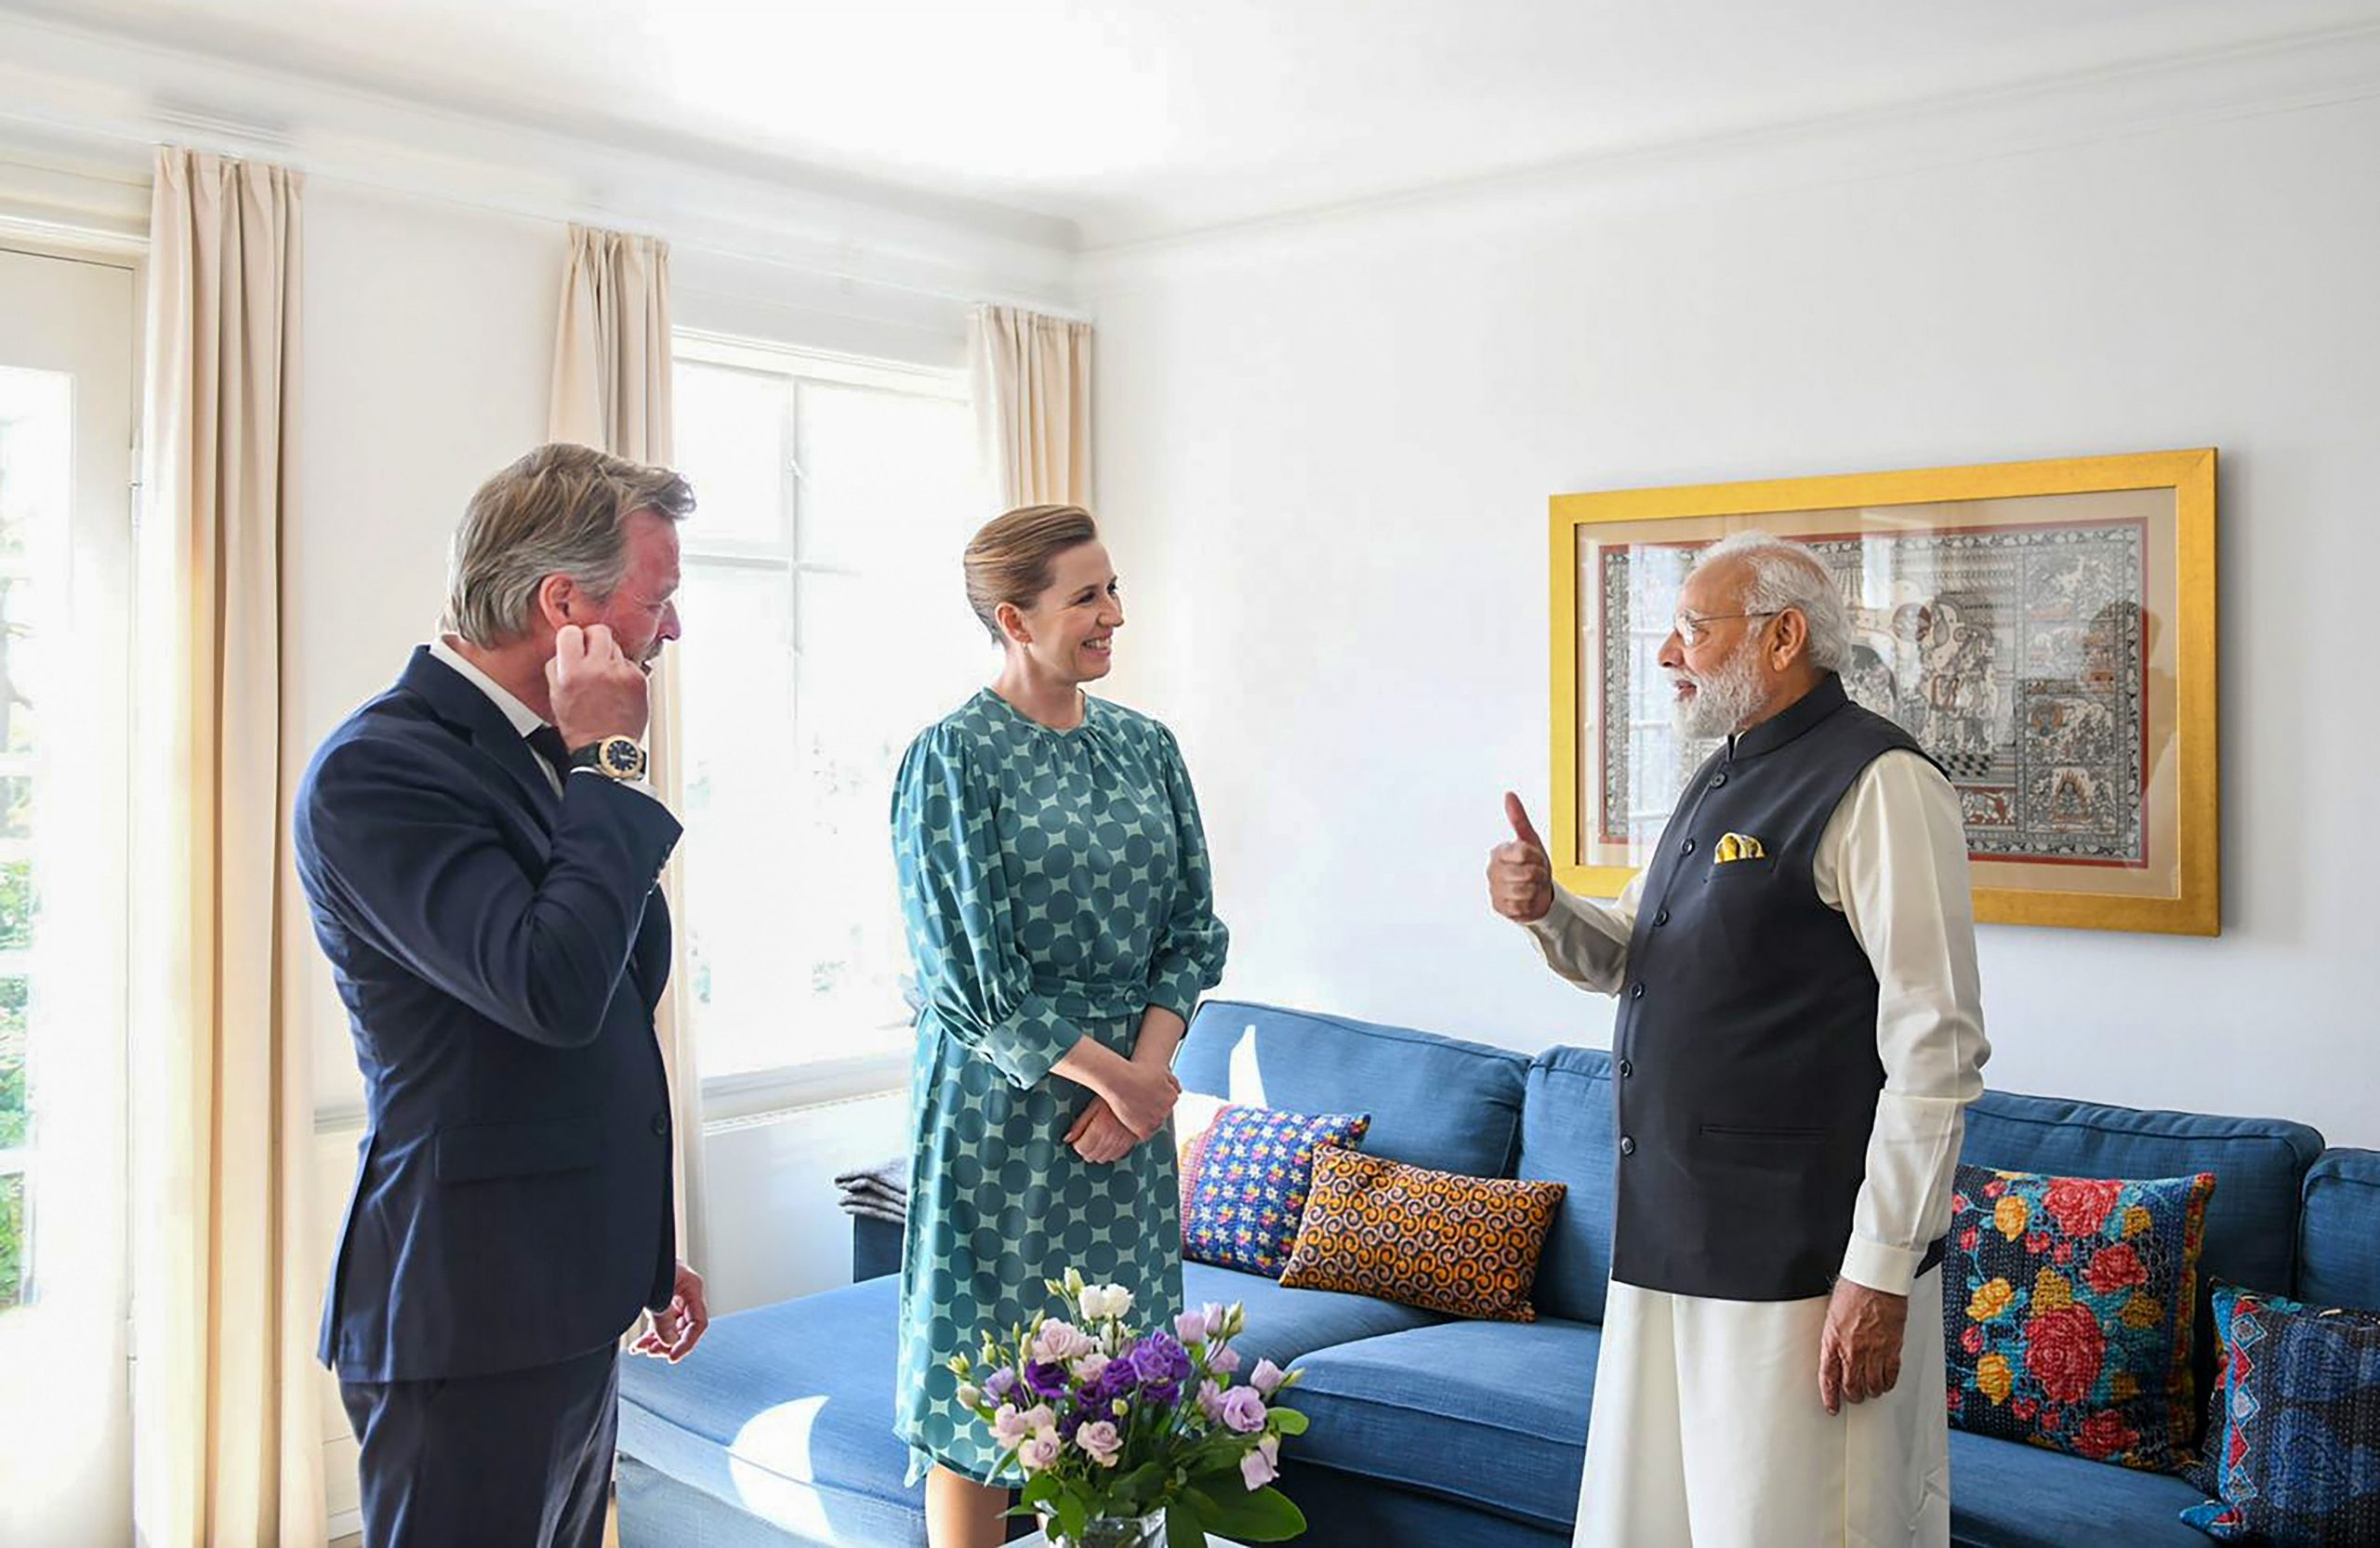 This Pattachitra painting gifted by PM Modi to Danish PM now adorns her home